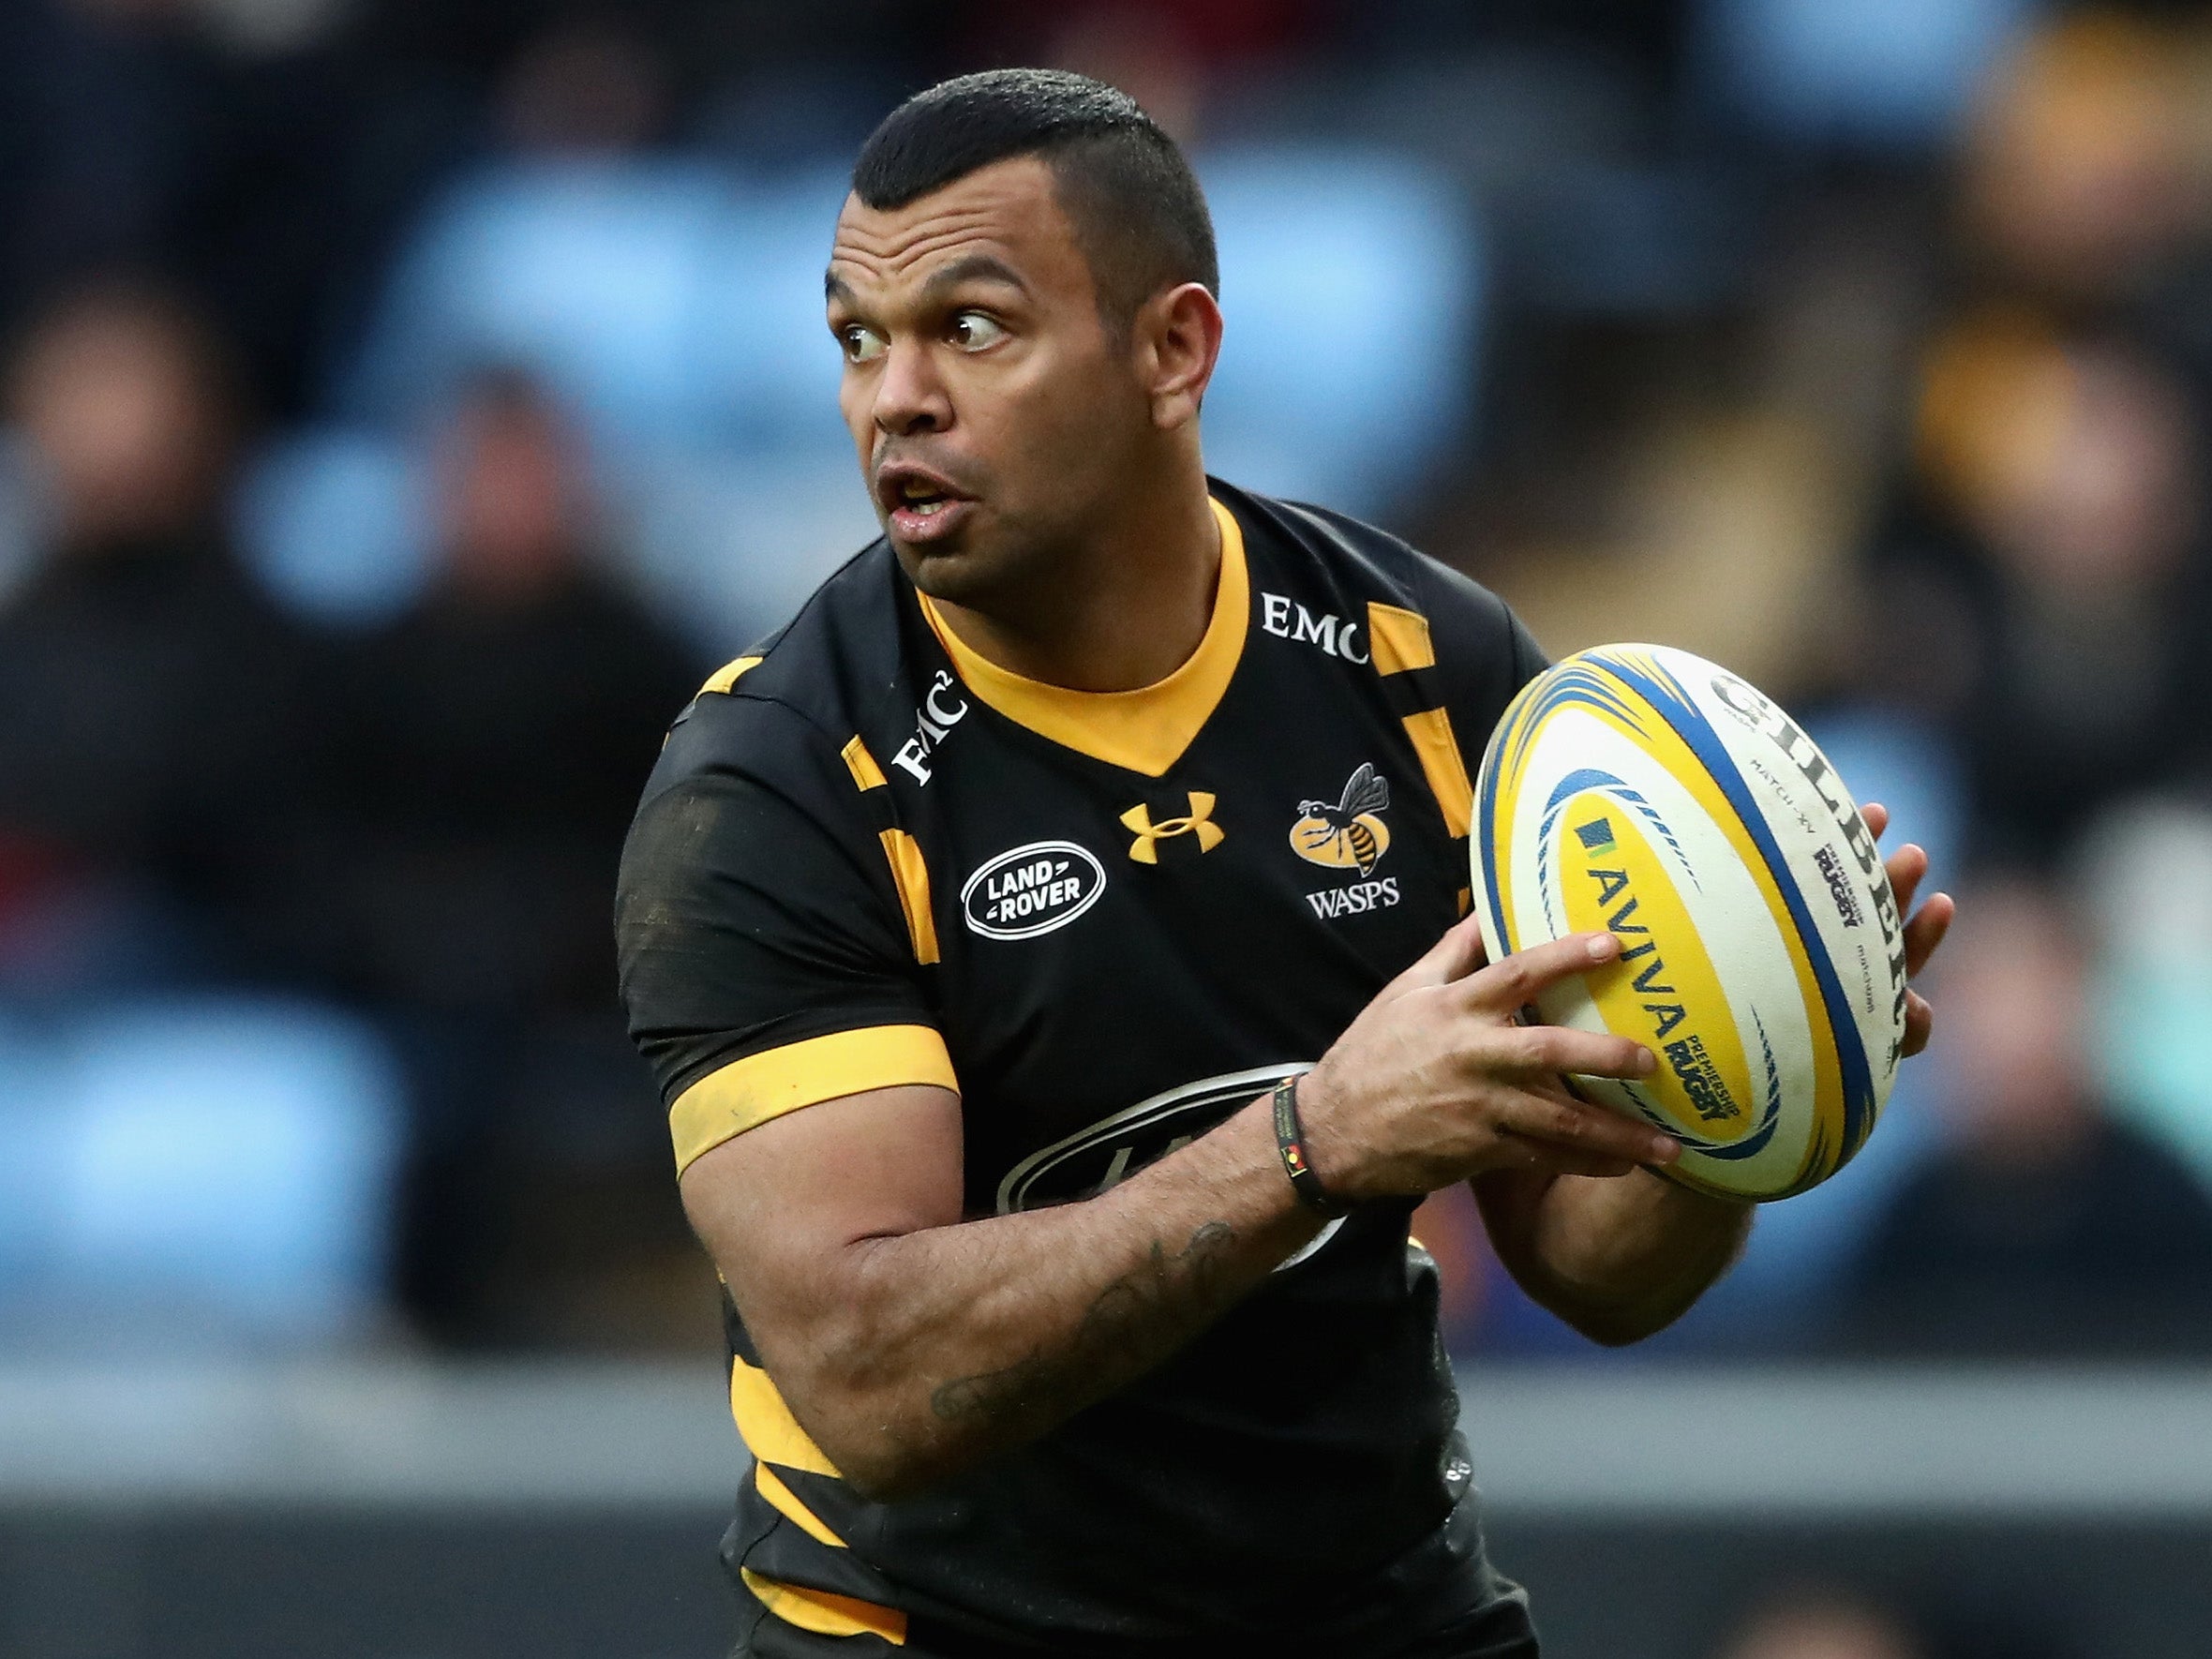 Beale played at full-back in the Christmas Eve win over Bath